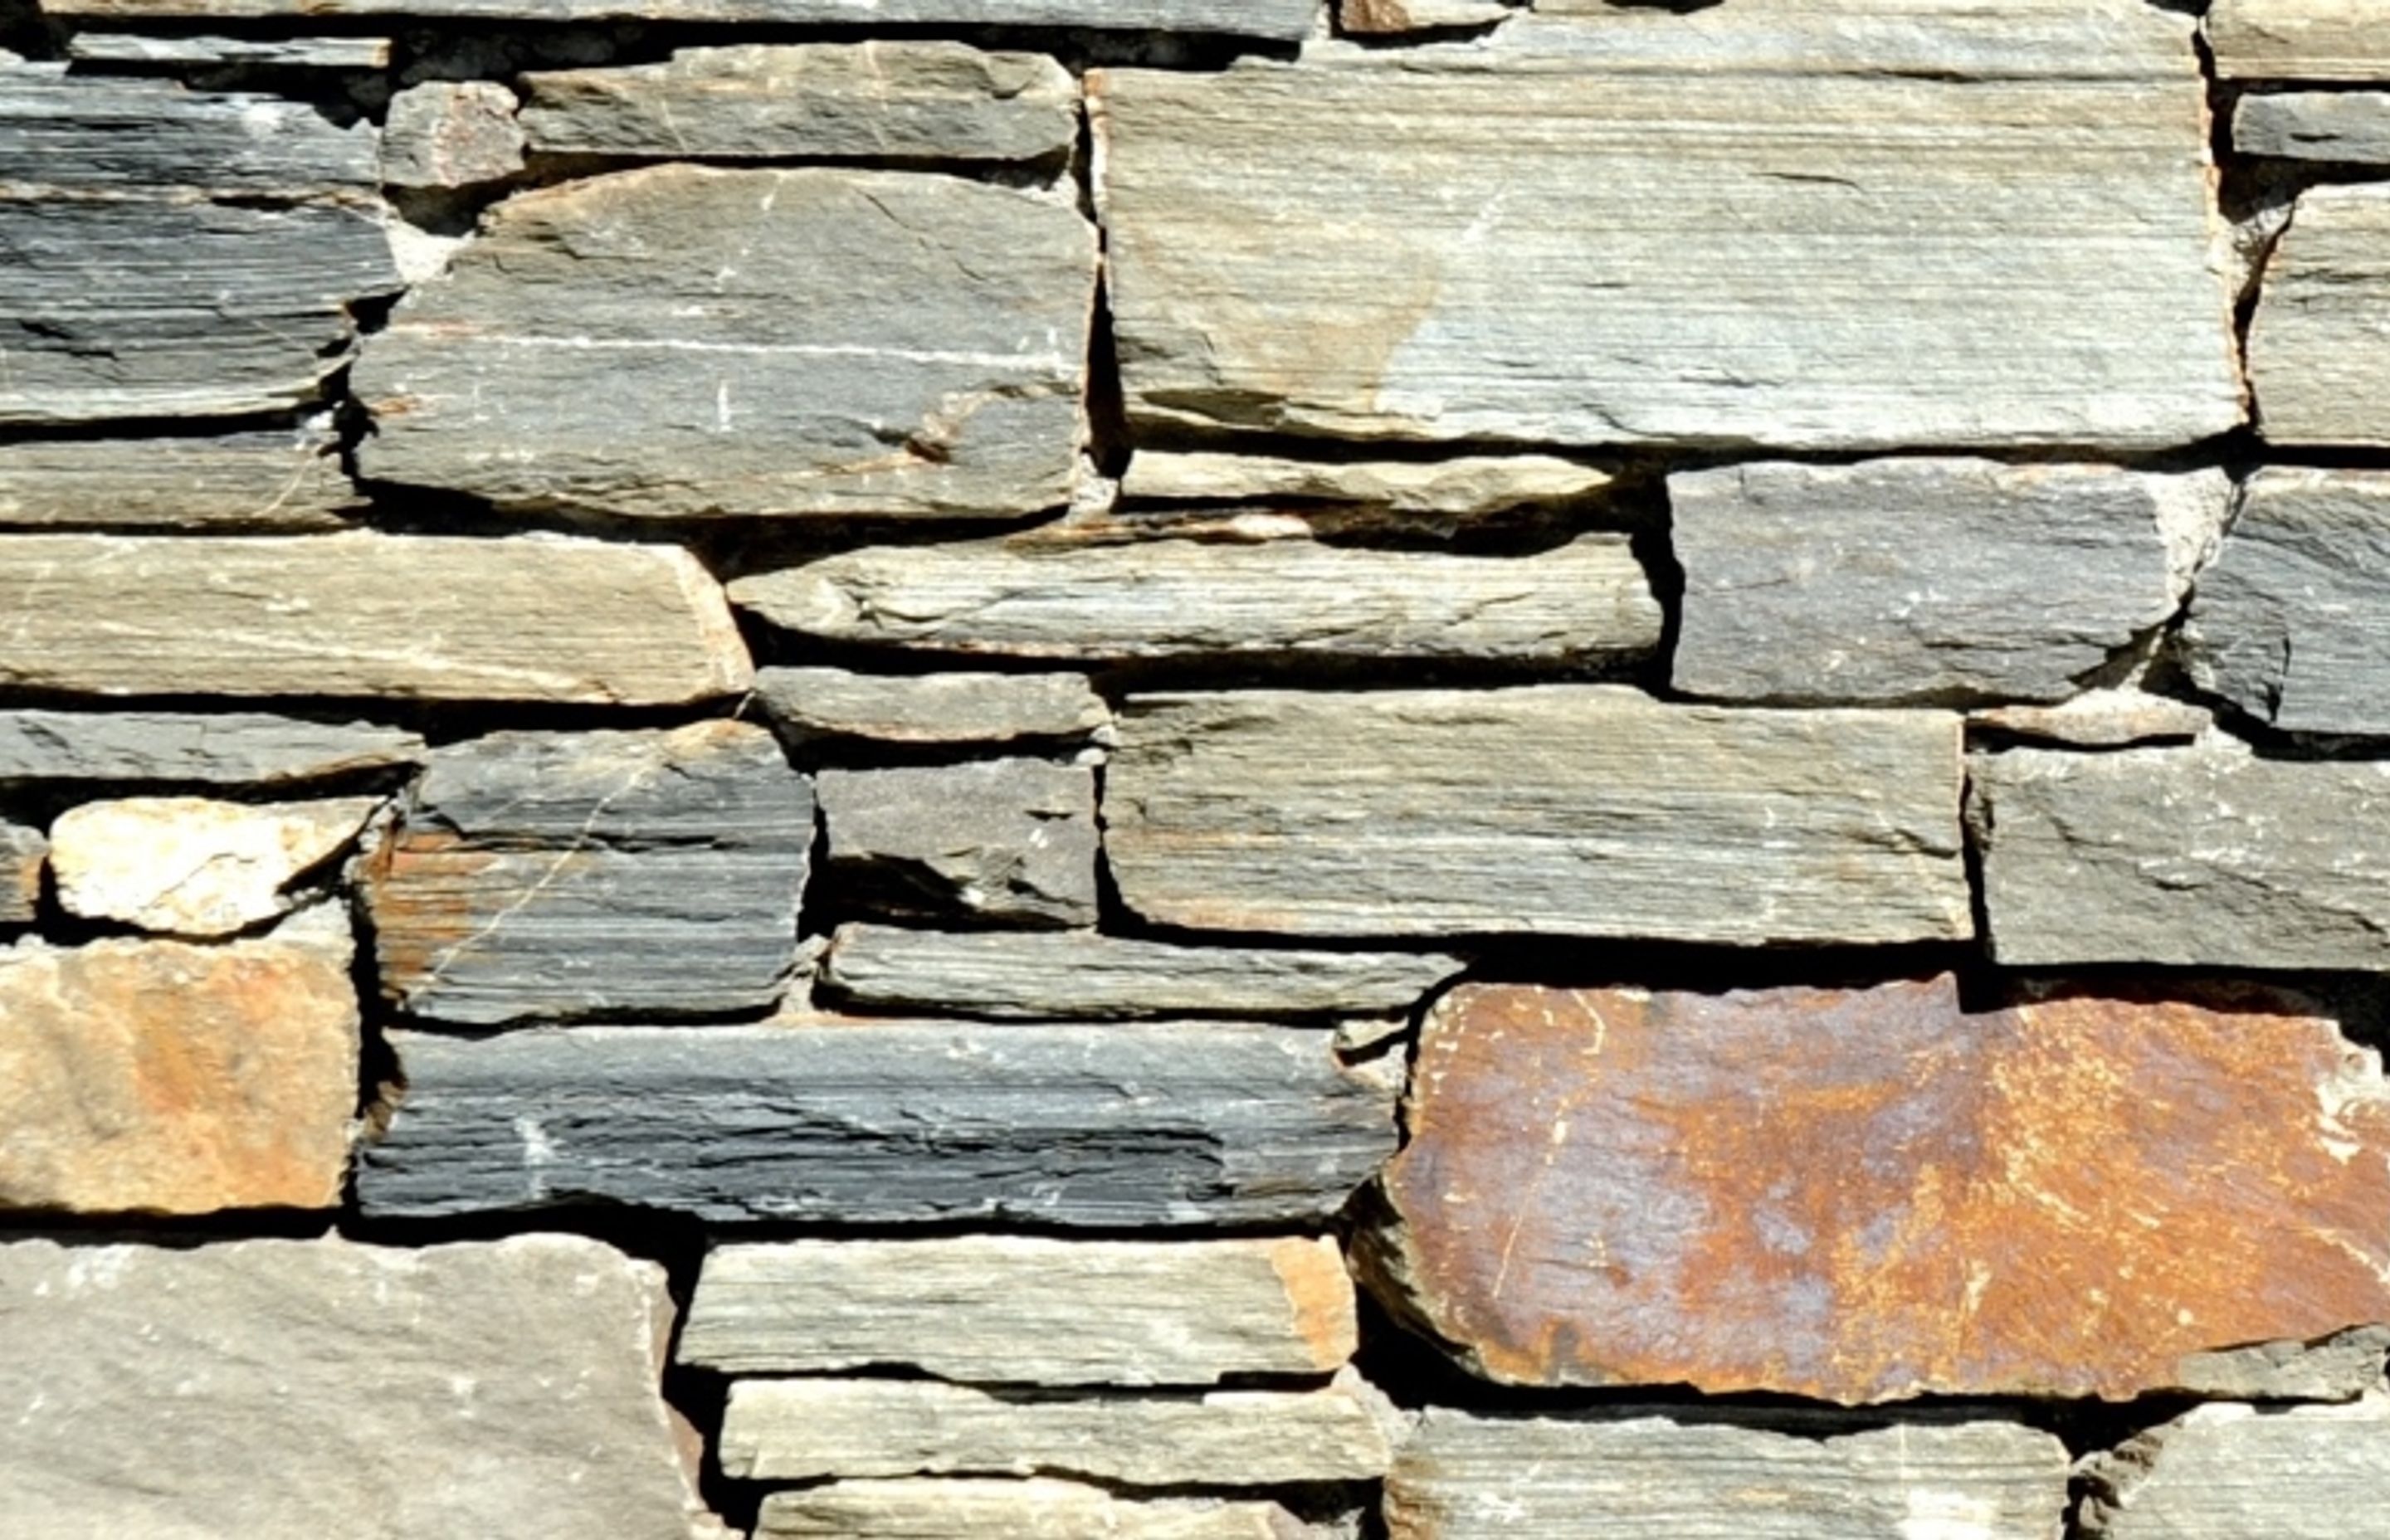  Dry Stacked (Tight Stacked): Stone is tightly stacked with no grout visible. This is a very popular style that harks back to ancient dry stone walls and showcases the stone. Genuine dry stacked walls contain no grout at all, however this is not possible 